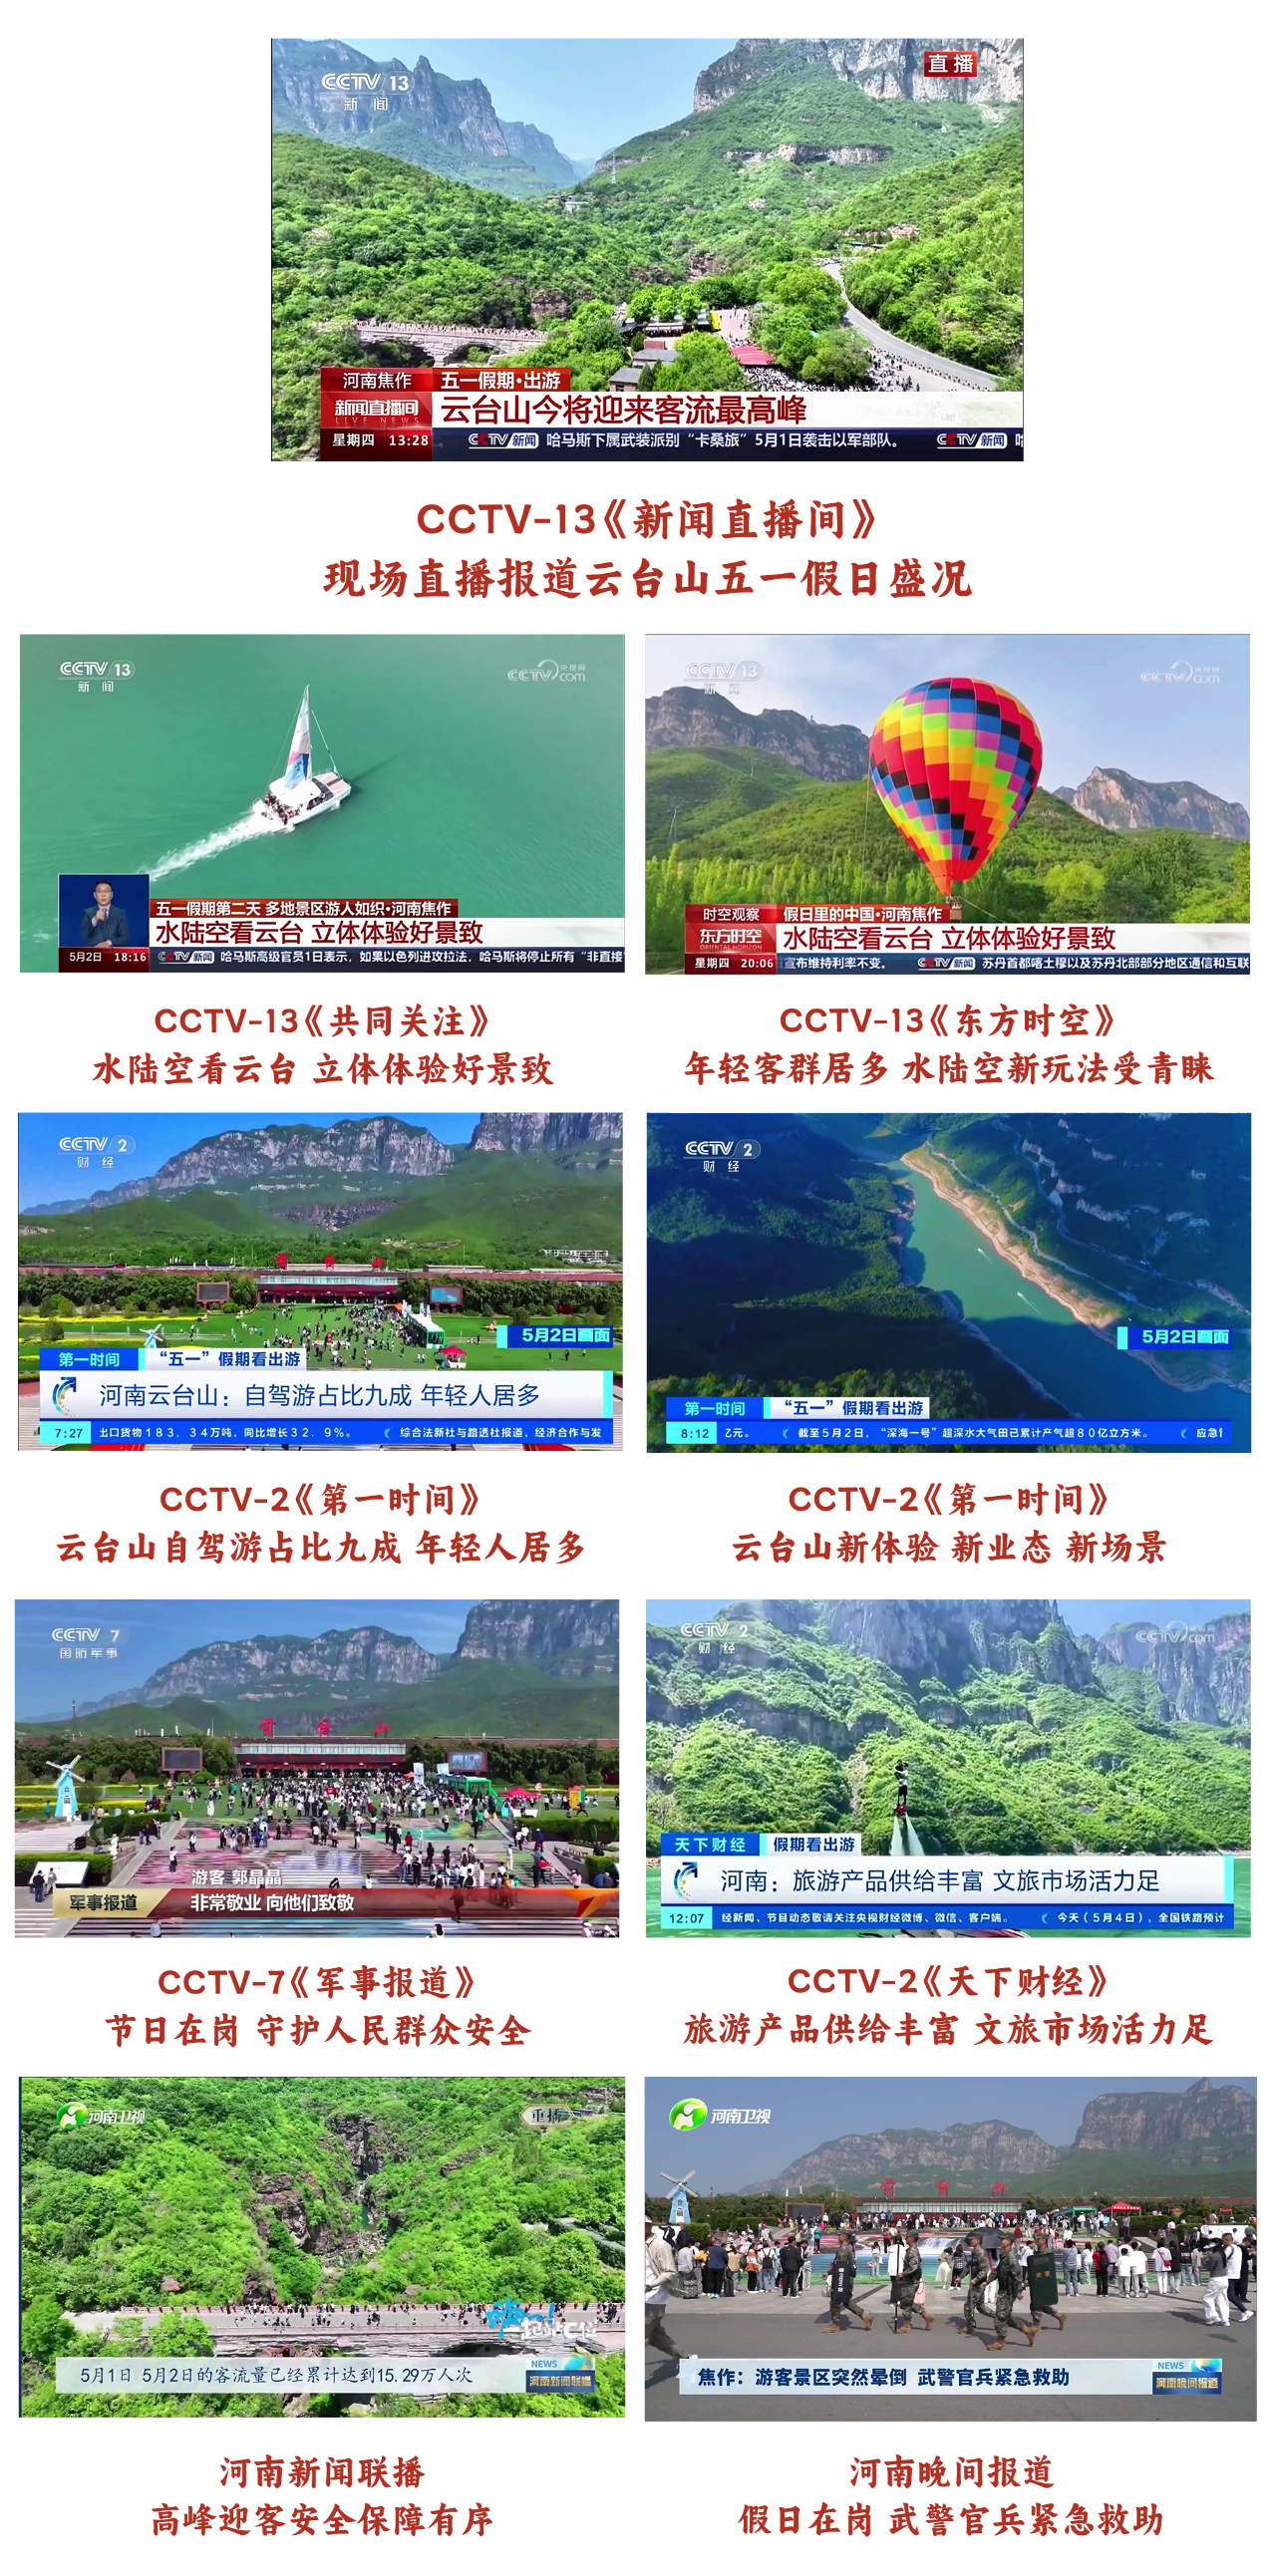 Yuntaishan, seven times focused on by CCTV! Full of vitality during the May Day holiday